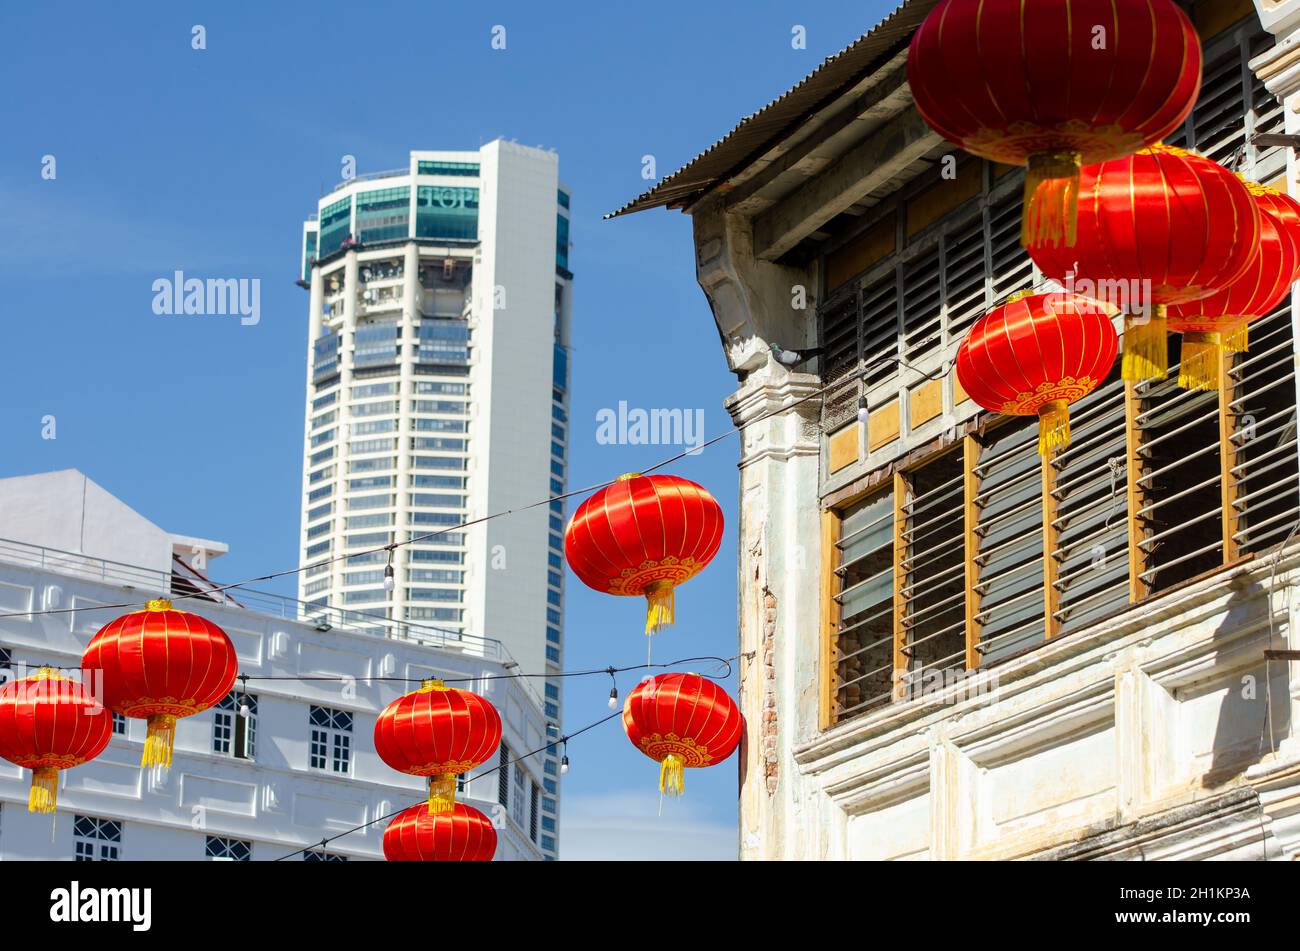 Georgetown, Penang/Malaysia - Jan 03 2020: Red lantern decorated near old heritage house. Background is KOMTAR building. Stock Photo